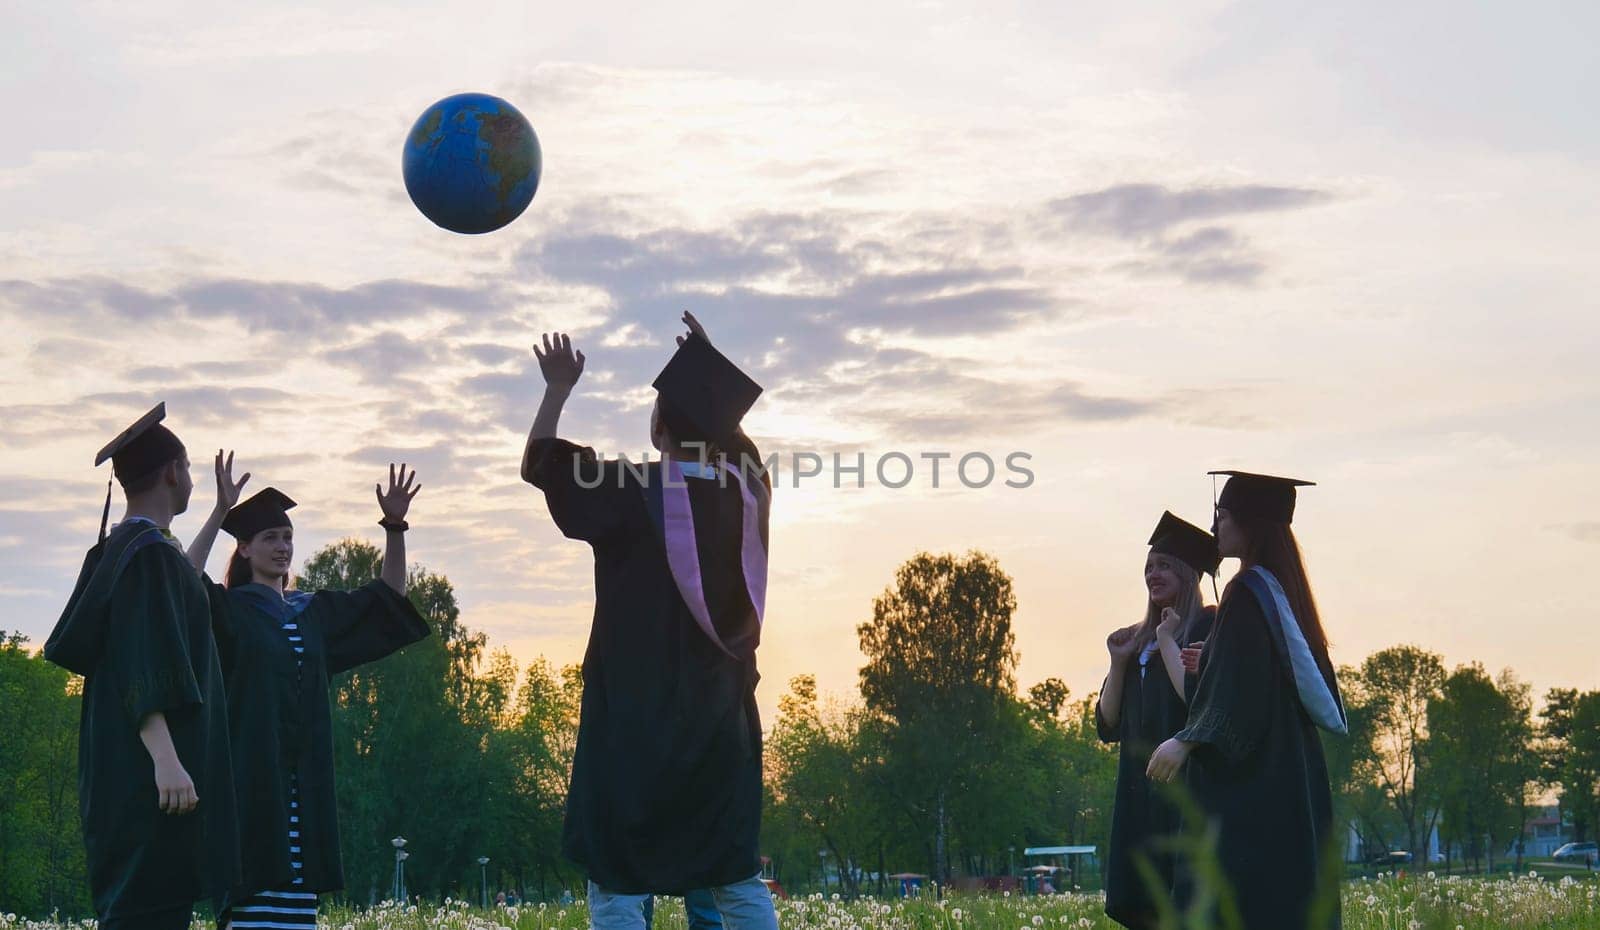 Graduates in costume playing with a ball at sunset